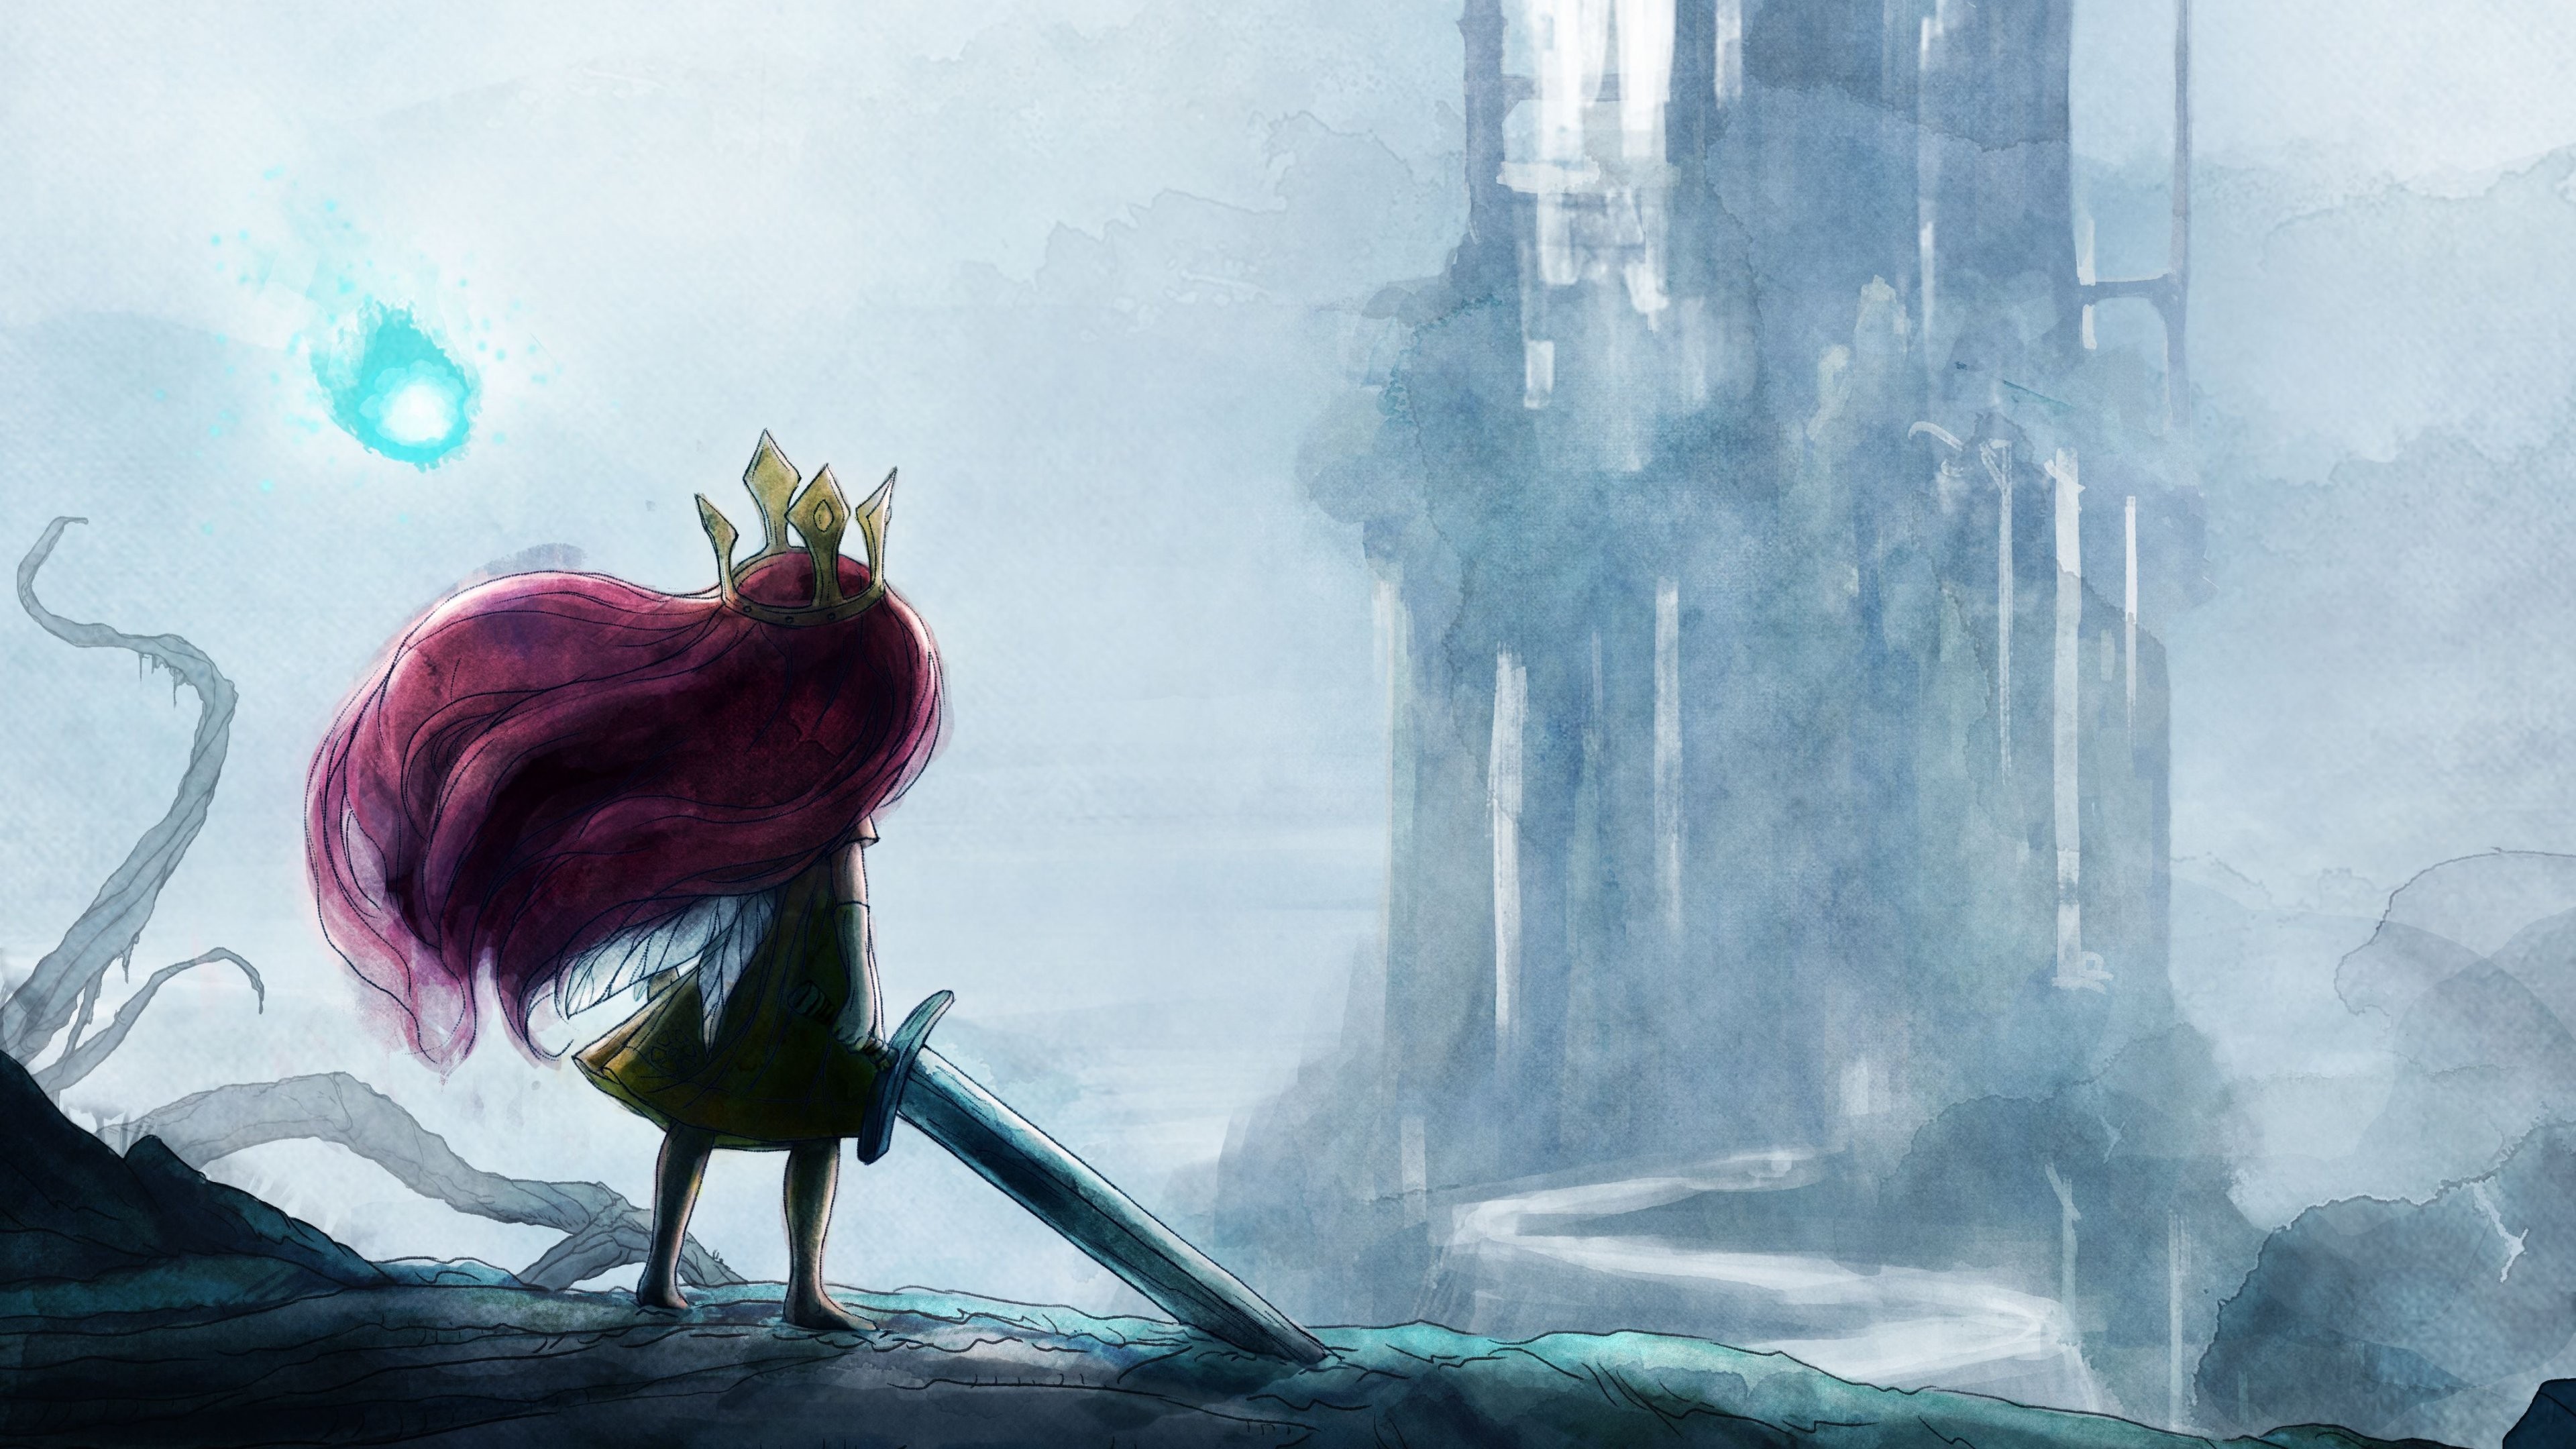 General 3840x2160 drawing sword aurorae Child of Light video game girls women with swords weapon crown fantasy art castle fantasy girl video game art